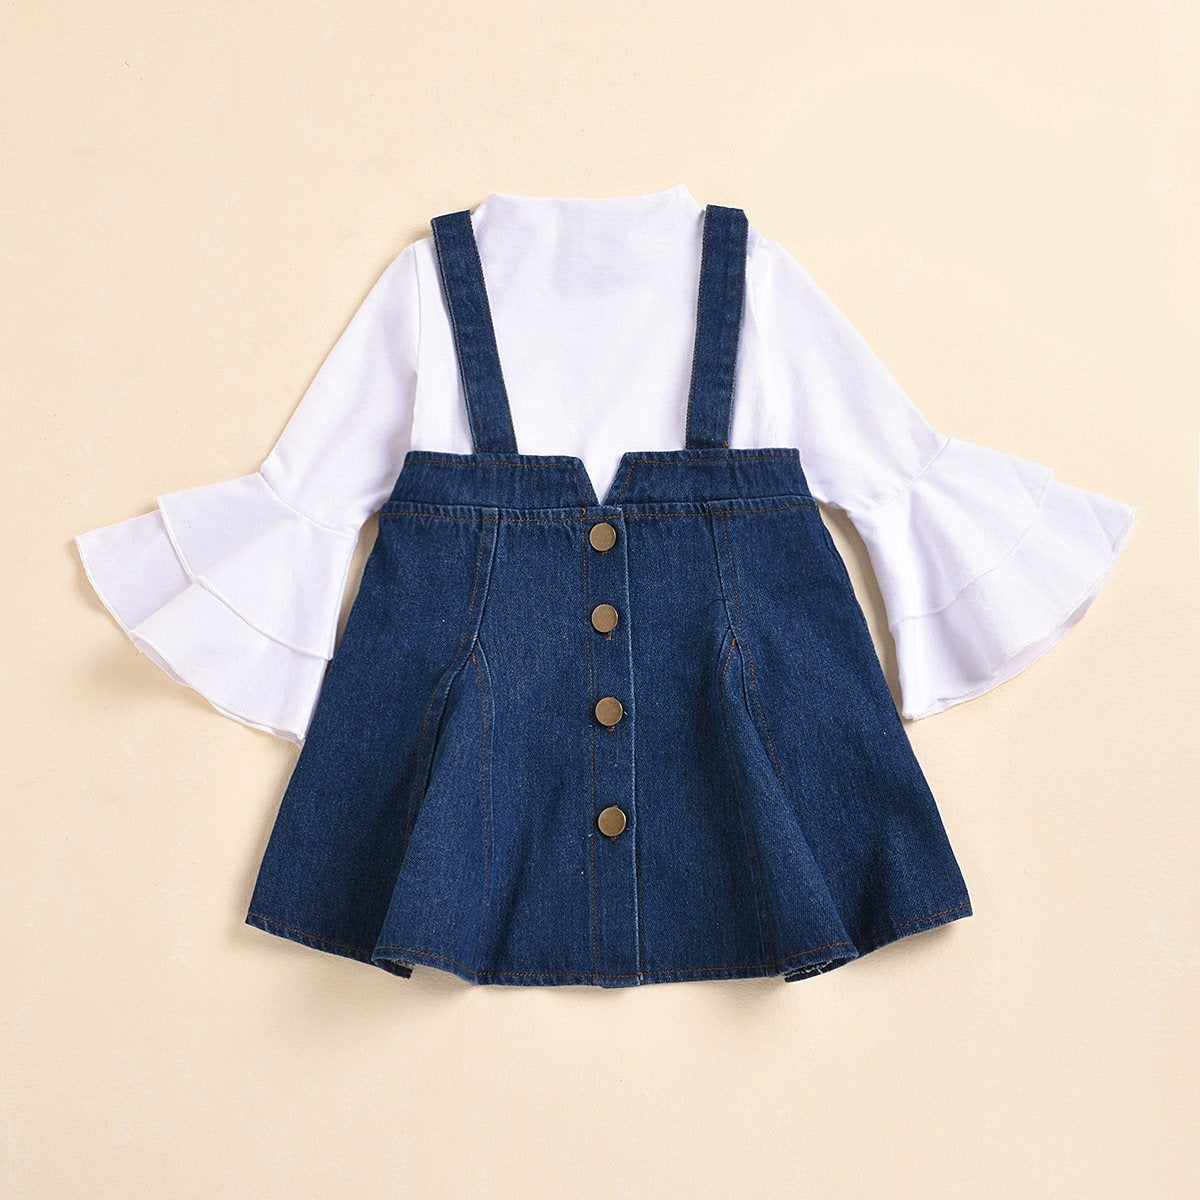 Buy Toddler Girl Denim Skirt Outfits Long Sleeve Sweatshirt Tops Button  Down Jeans Skirt Fall Winter Sweatsuit Clothes Set, Pink Cat, 3-4T at  Amazon.in